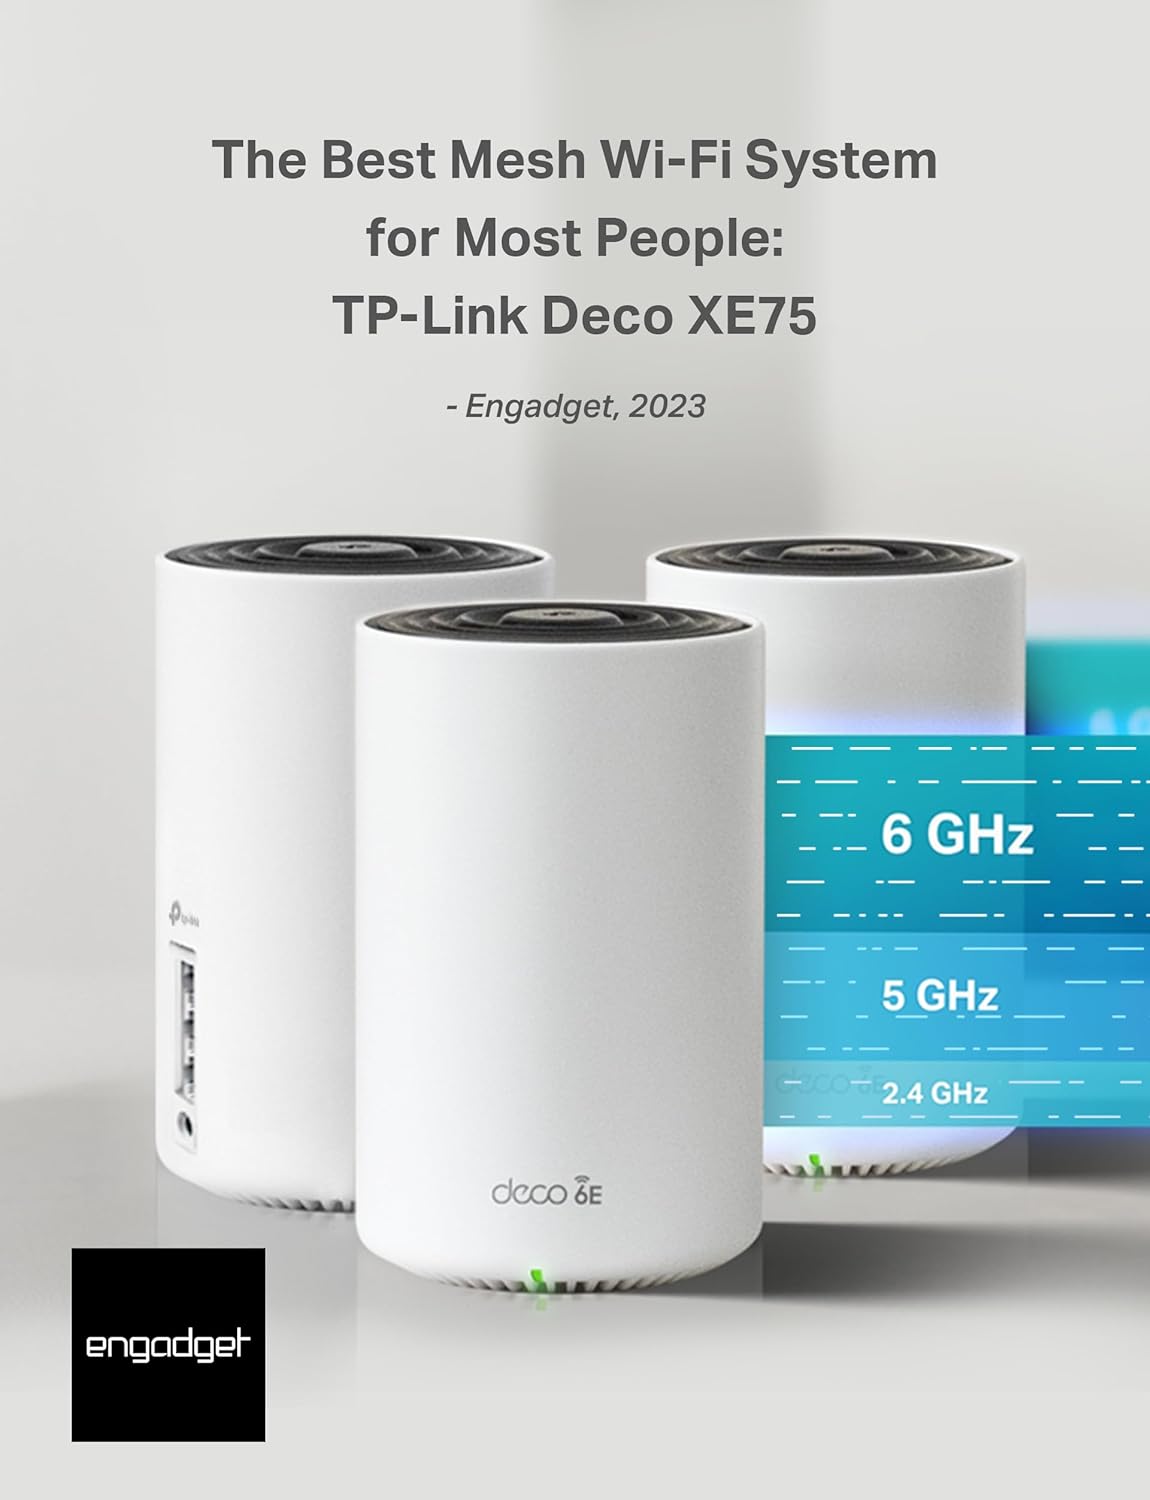 The best mesh Wi-Fi for 2023